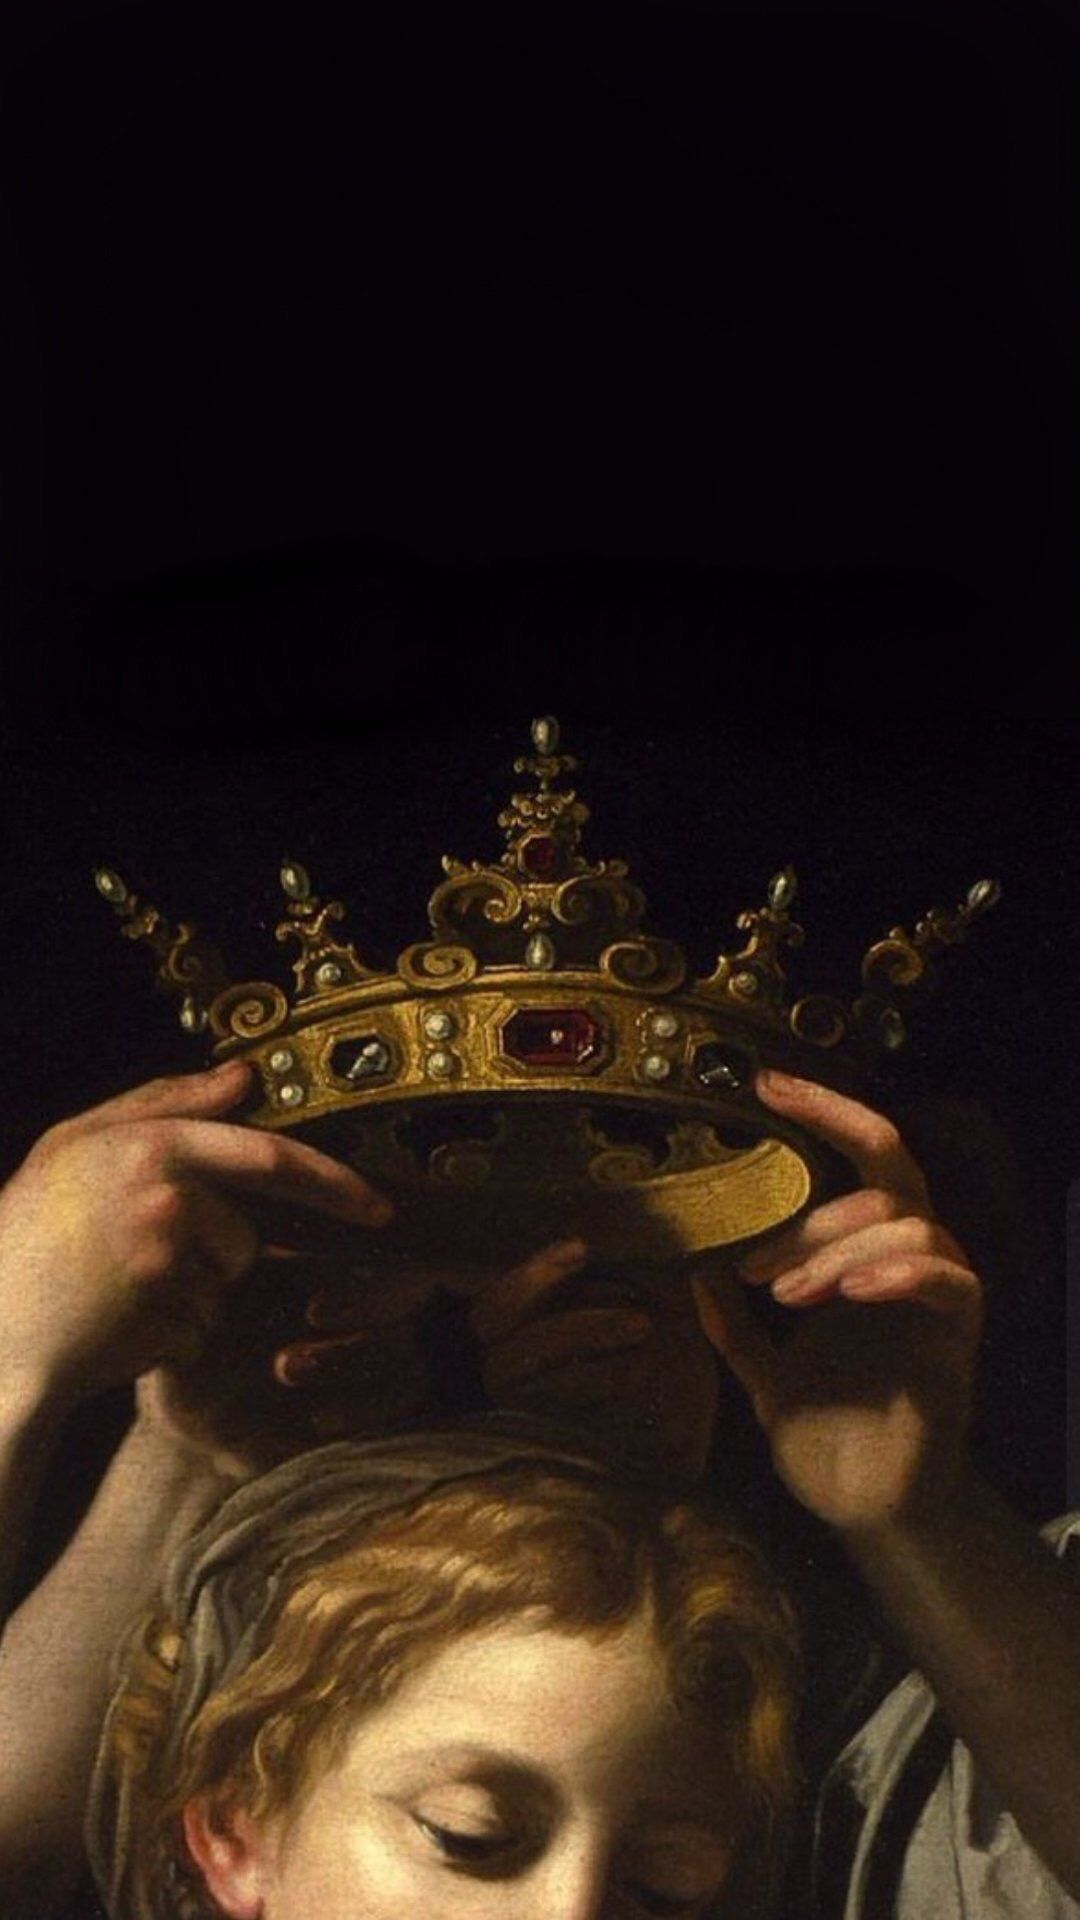 A painting of two people holding up crowns - Royalcore